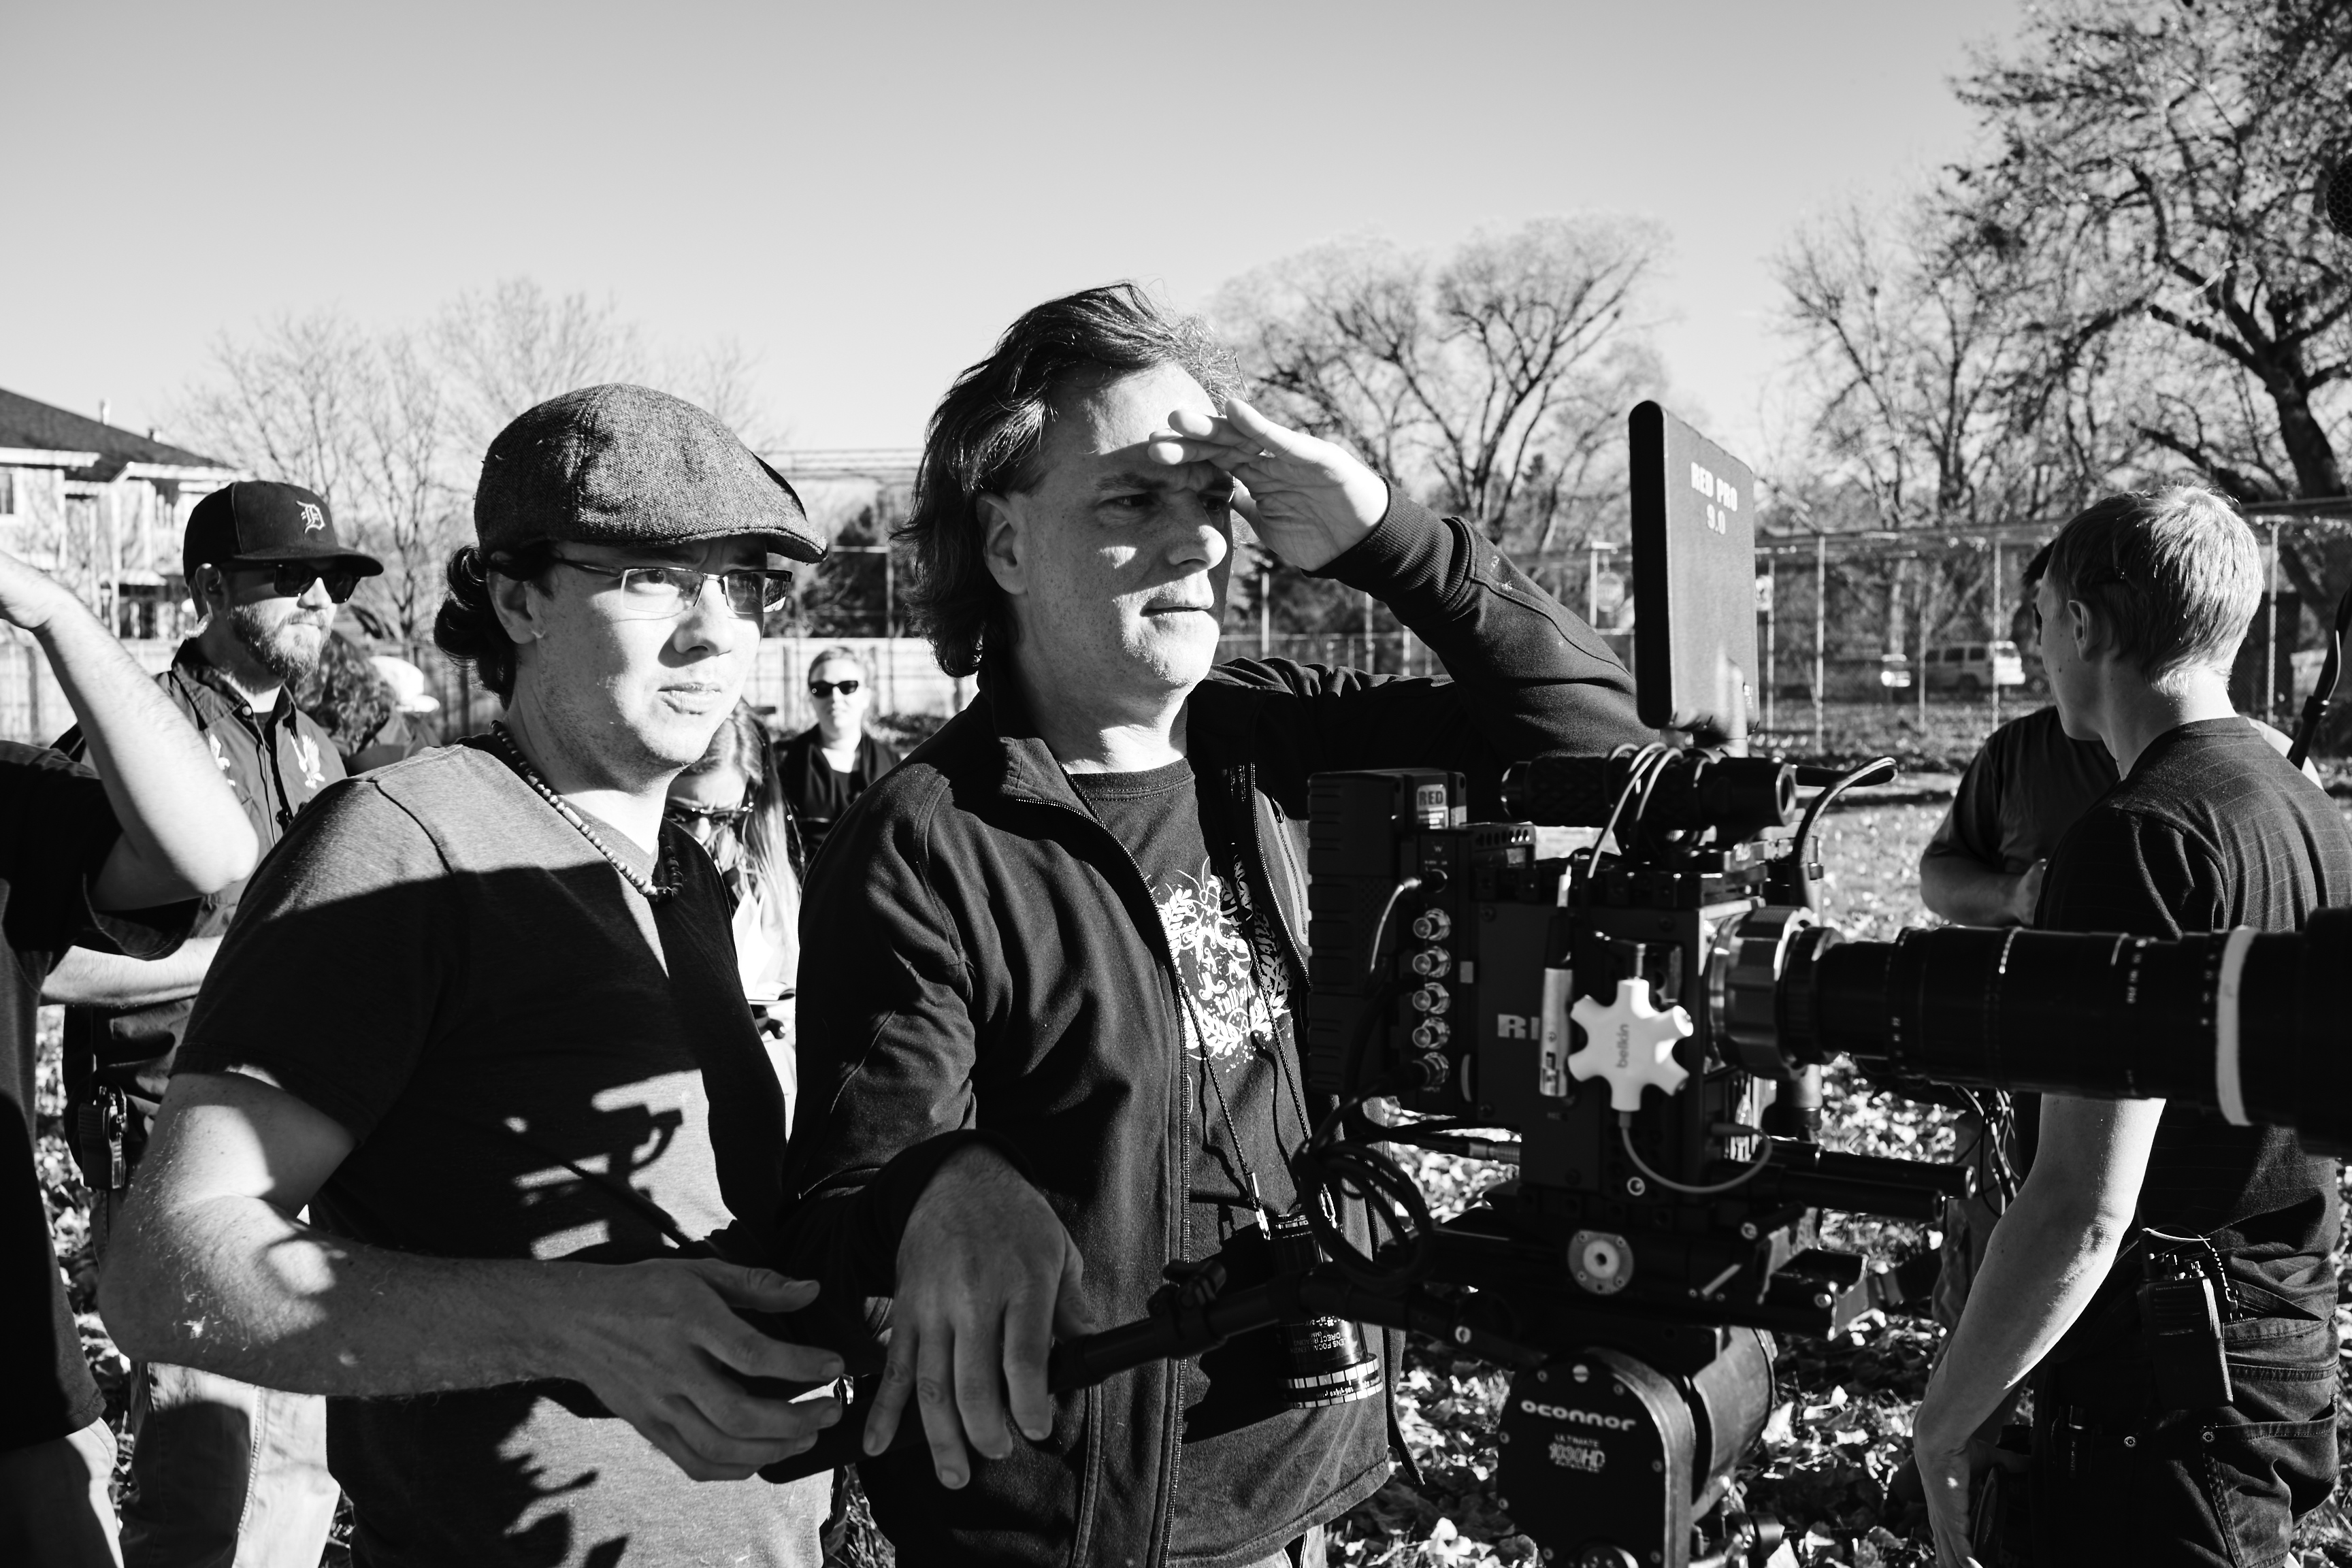 L-R: Laffrey Witbrod (DP) and Charles Dye (Writer/Dir) setting up a shot for Two Secrets